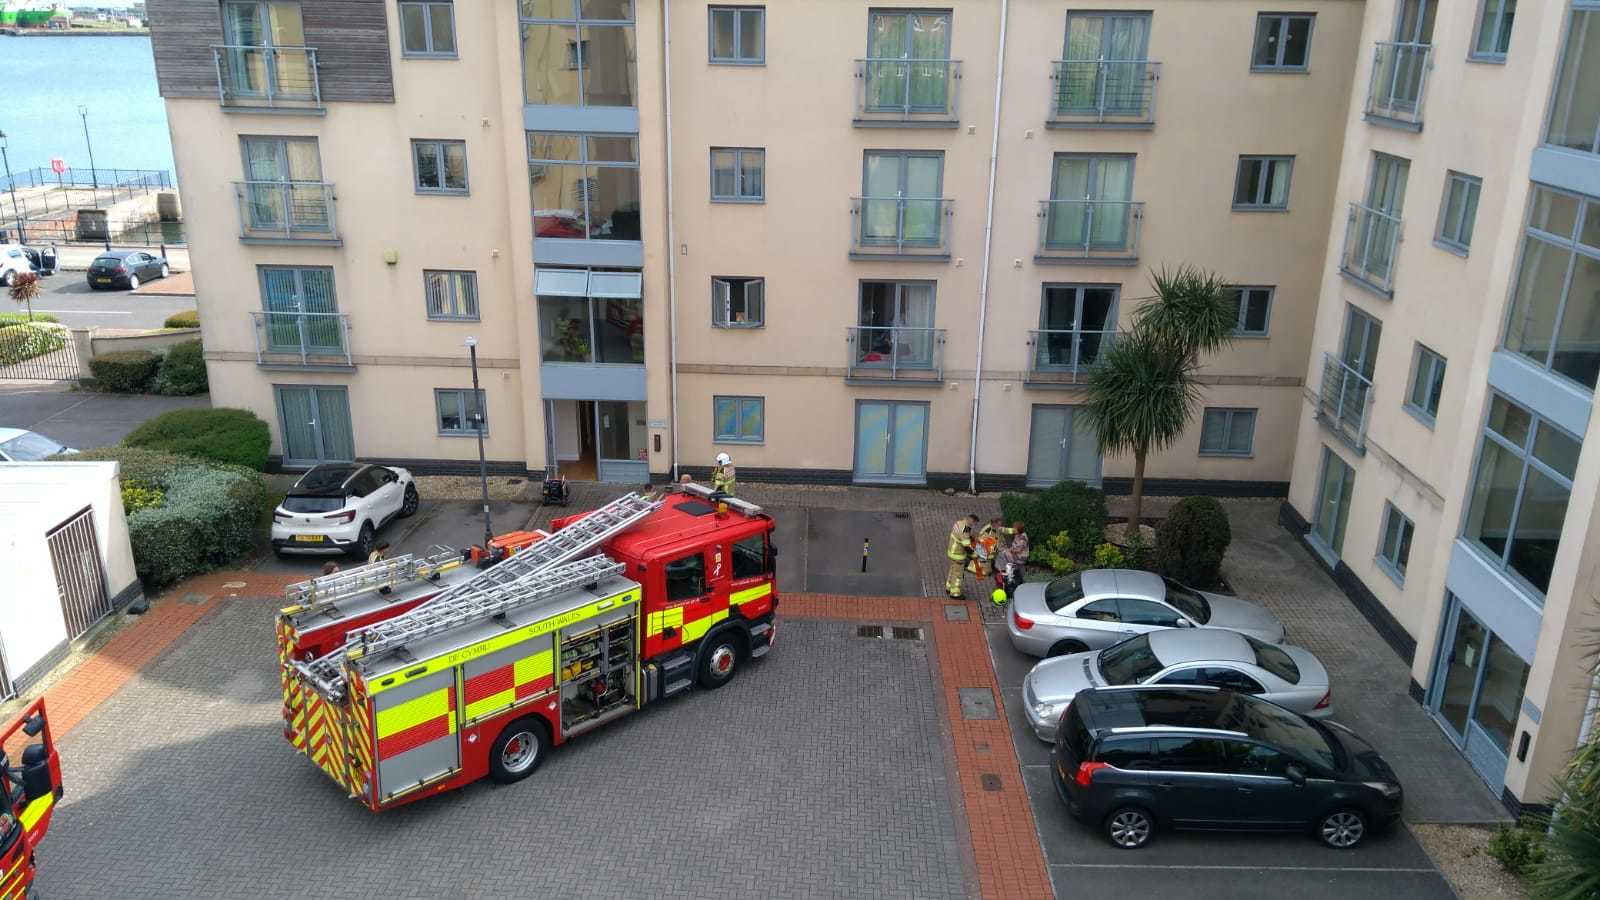 SWFRS at the scene in Barry